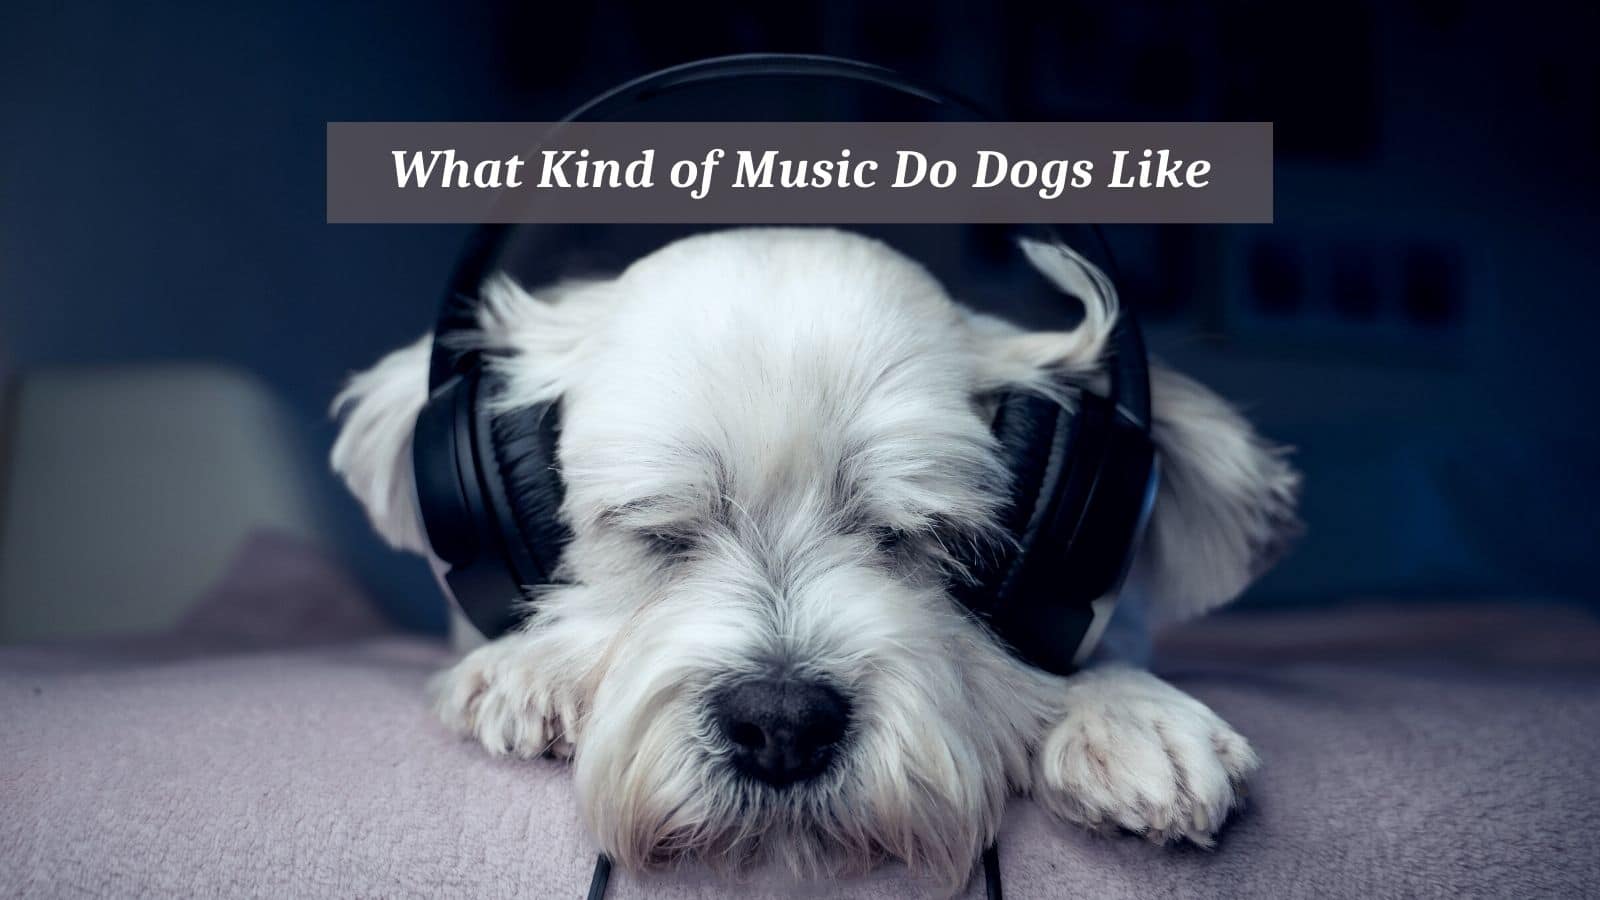 What Kind of Music Do Dogs Like